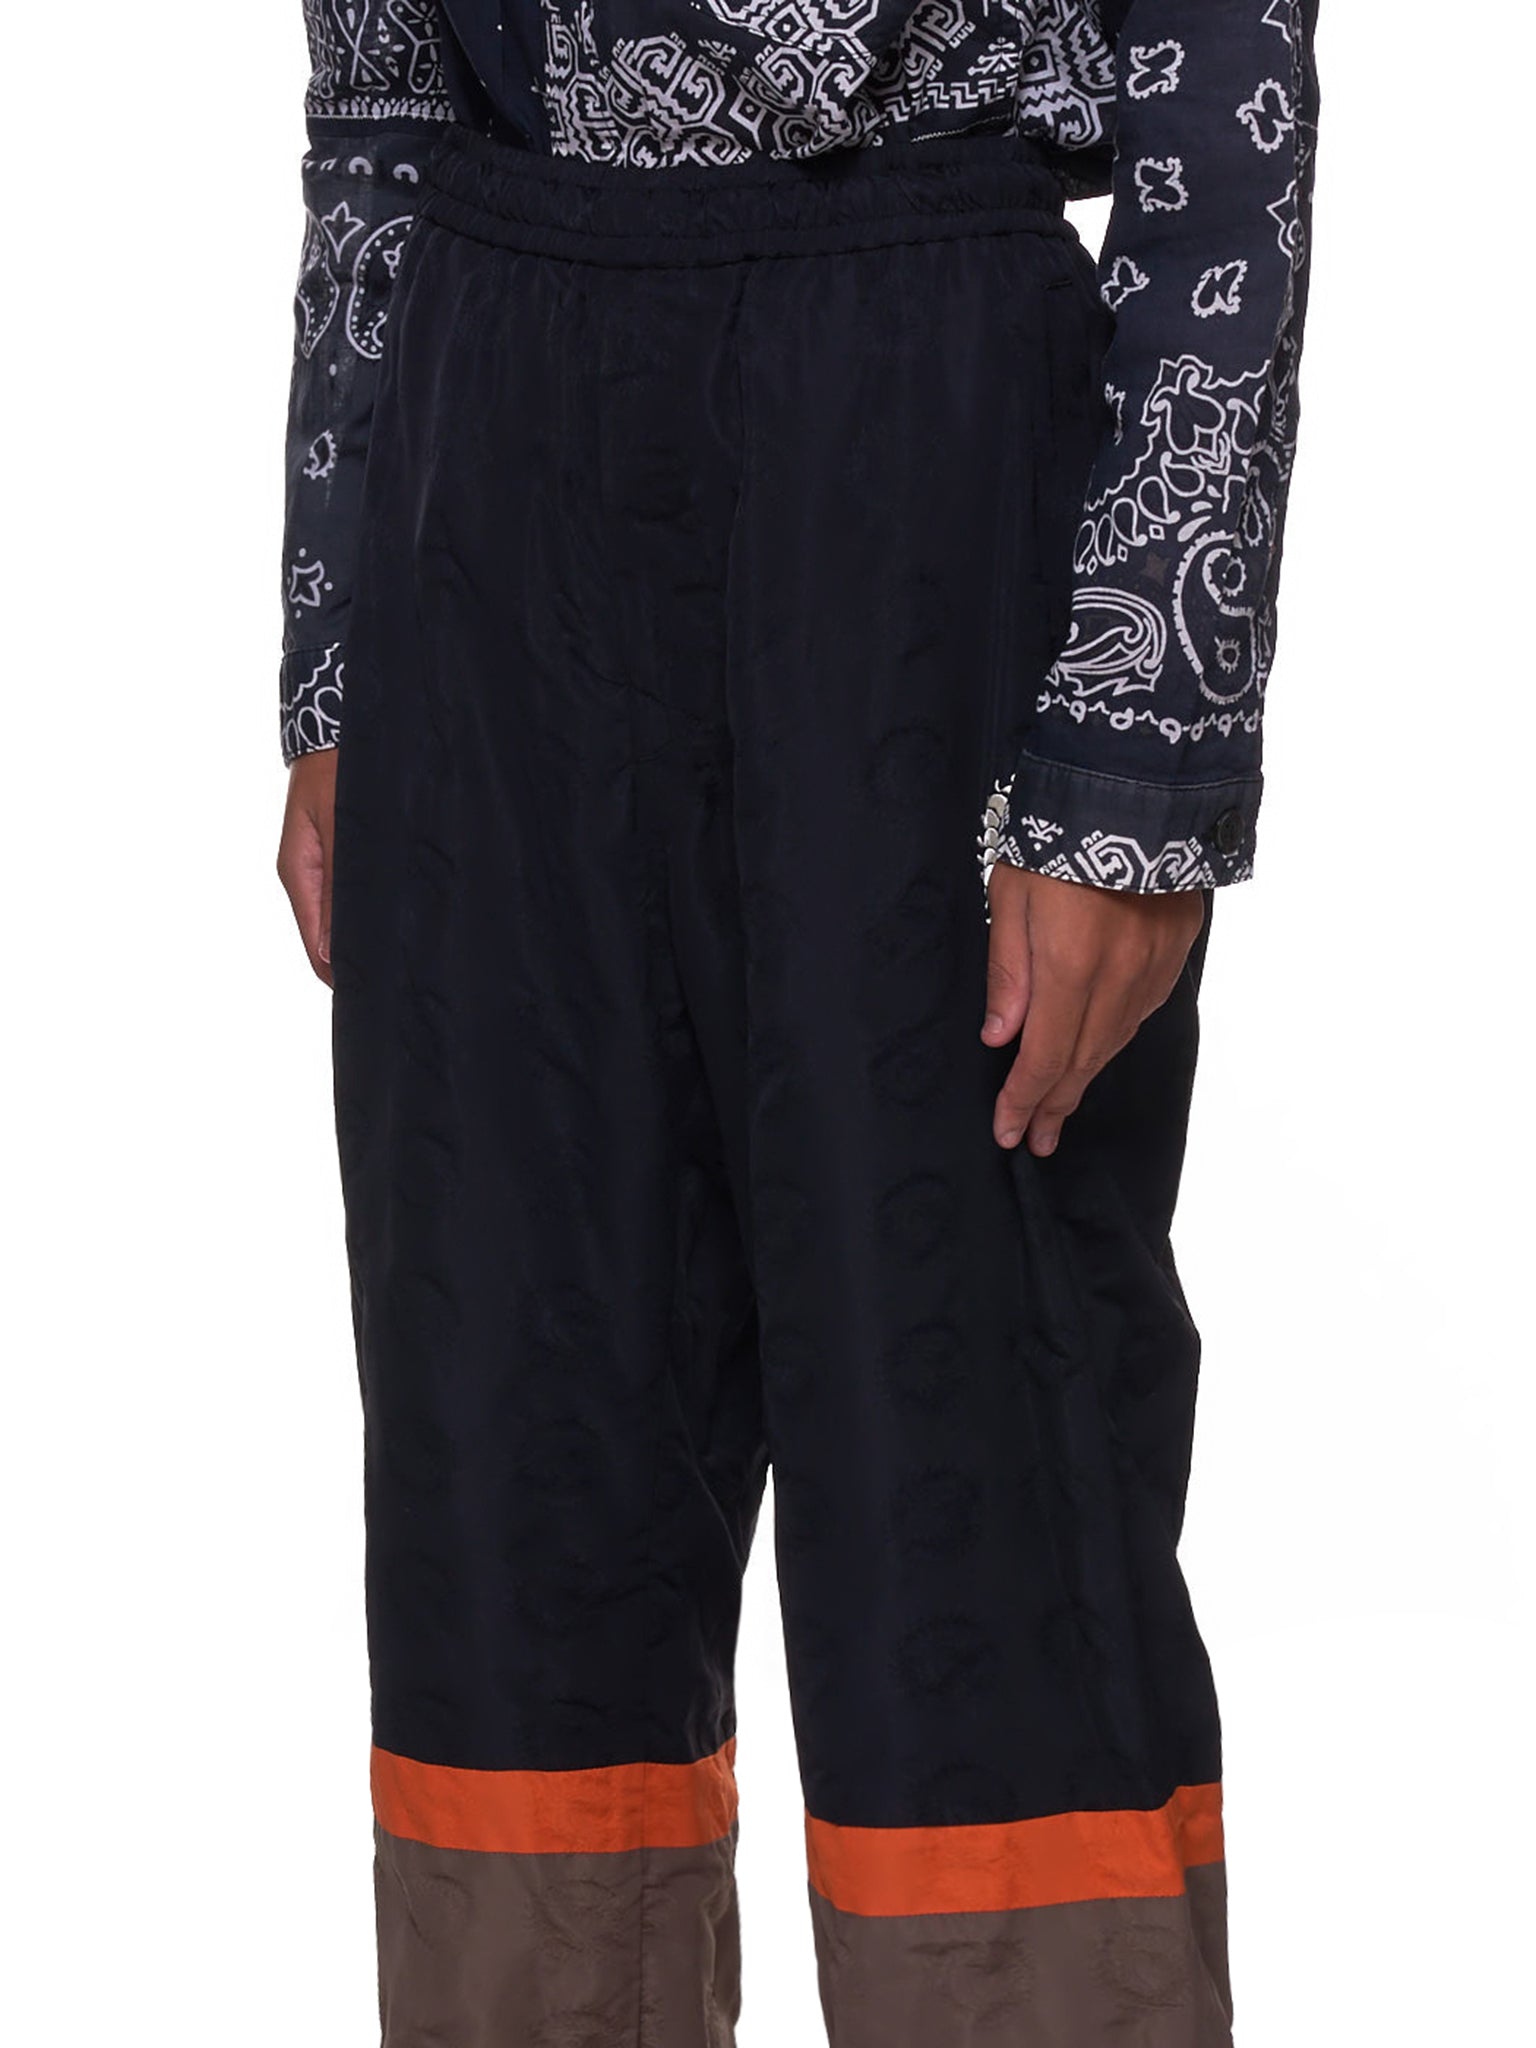 Embroidered Scorpion Trousers (UCZ4504-2-BLACK-BASE)